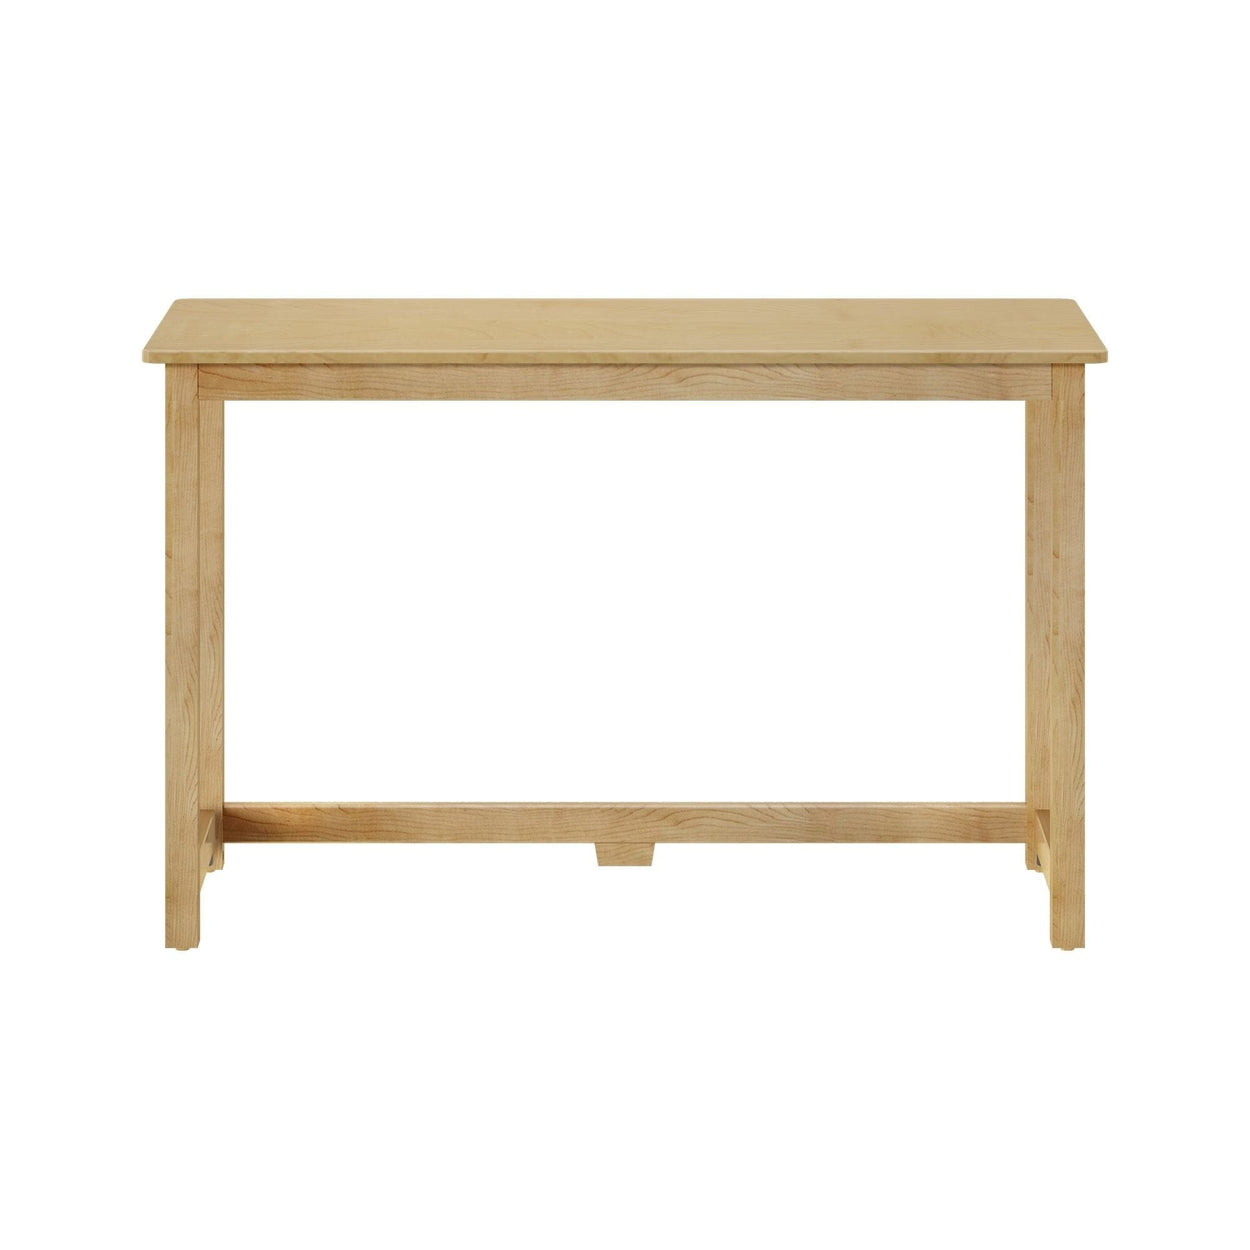 181200-001 : Furniture Simple Desk - 47 inches, Natural